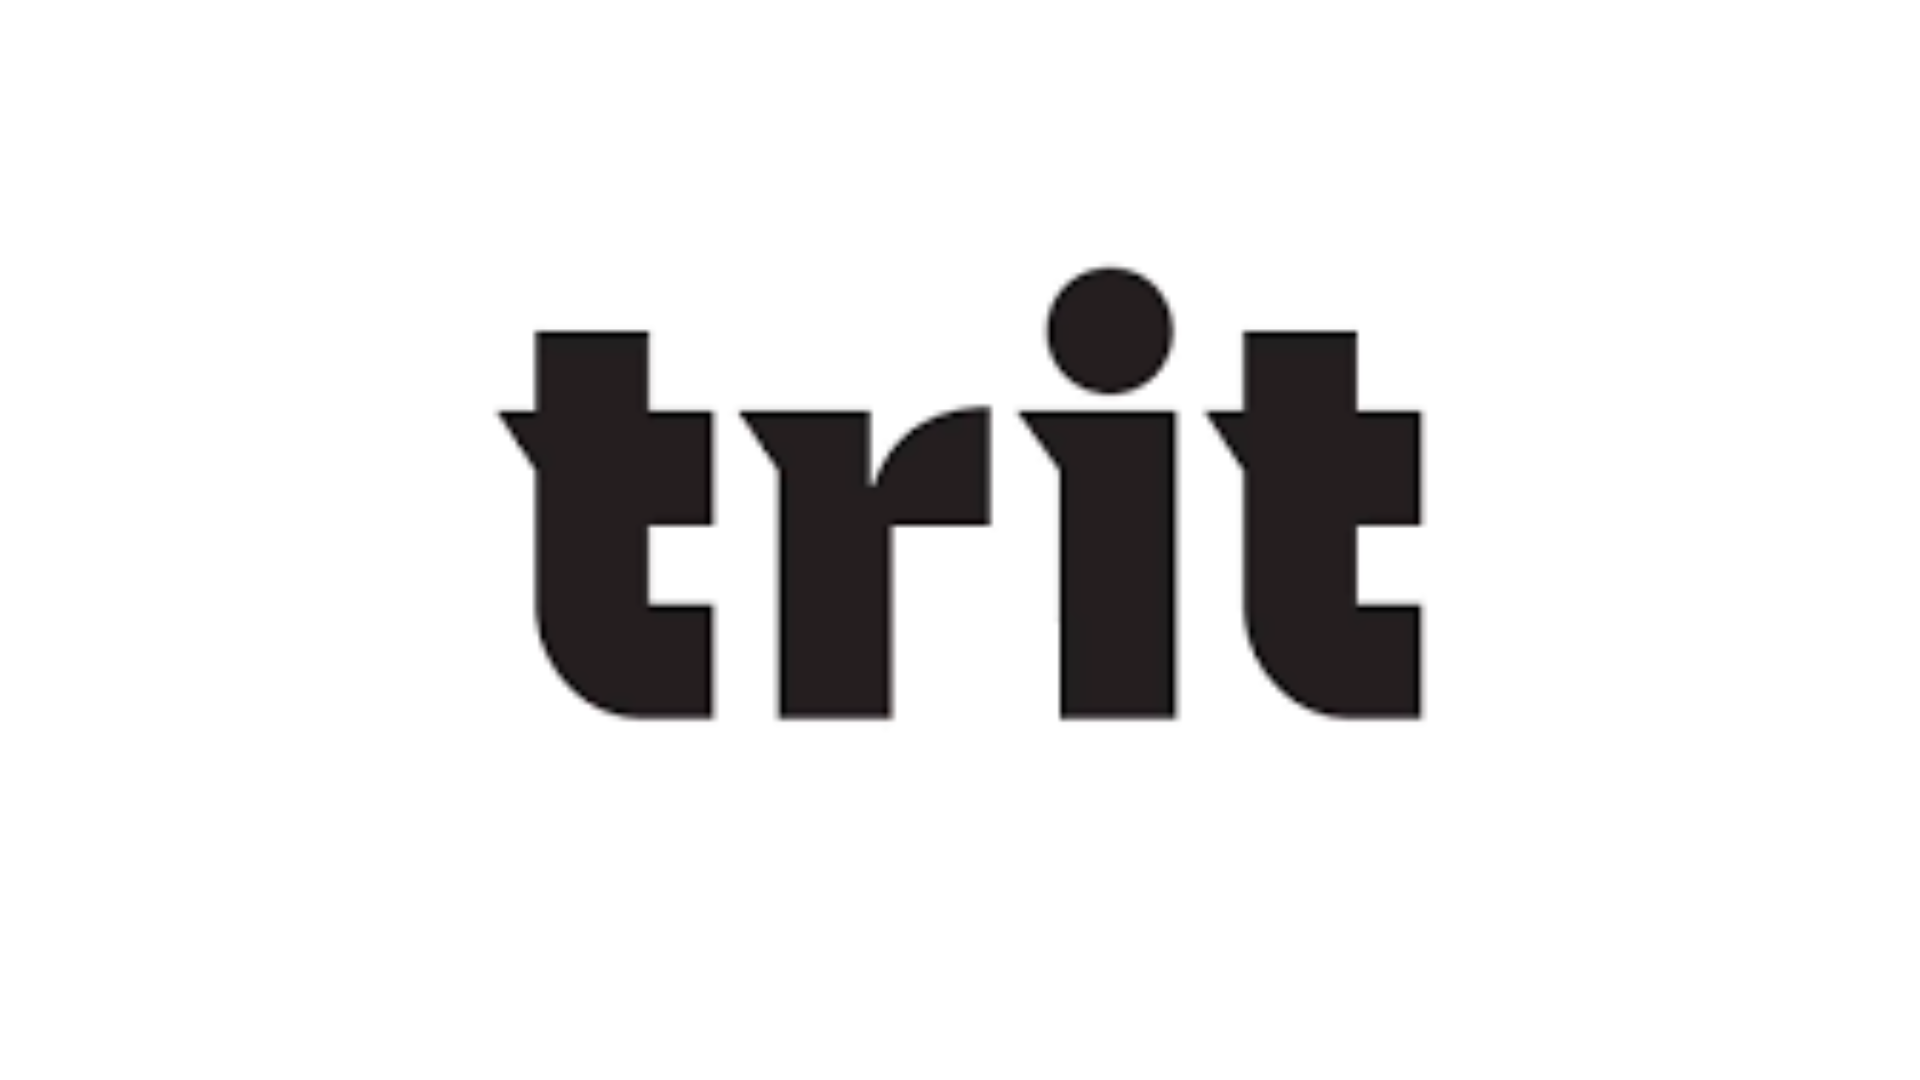 Get the Urban Edge style with Trit